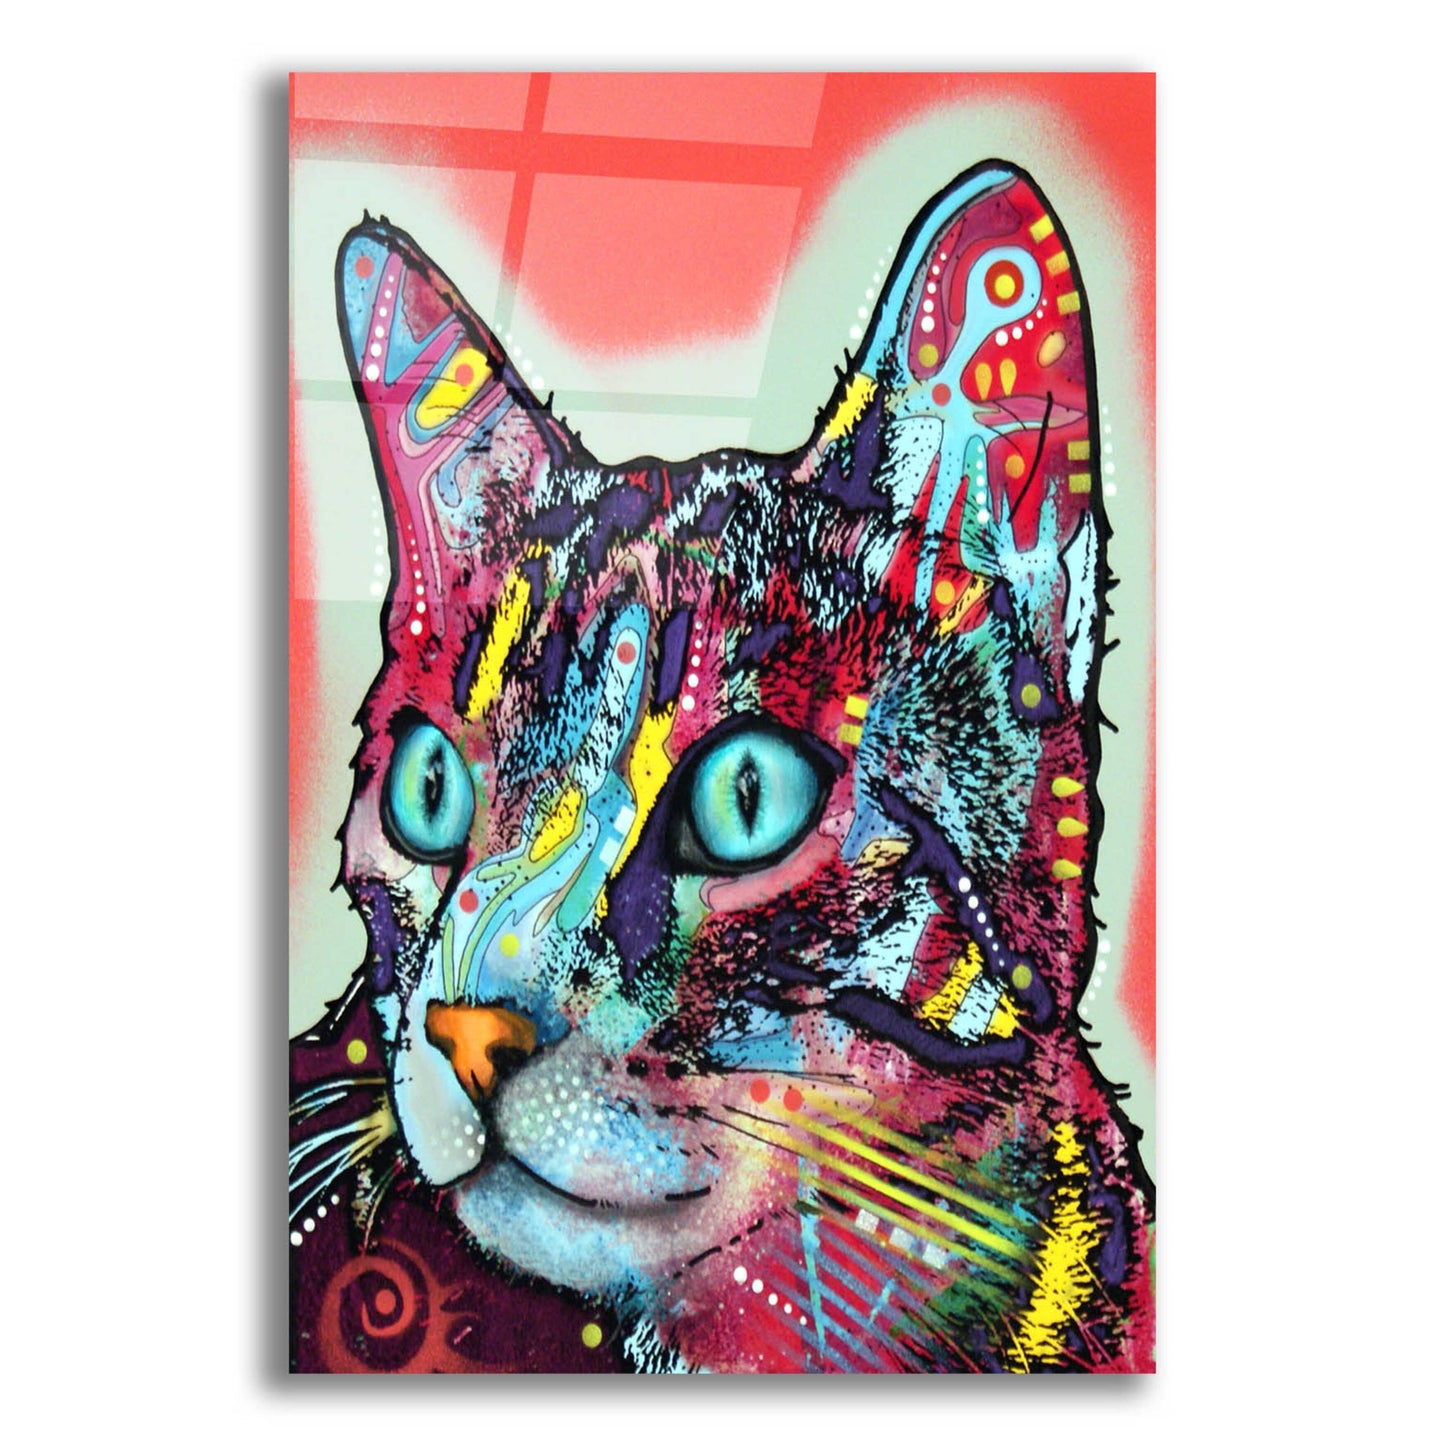 Epic Art 'Curious Cat' by Dean Russo, Acrylic Glass Wall Art,16x24